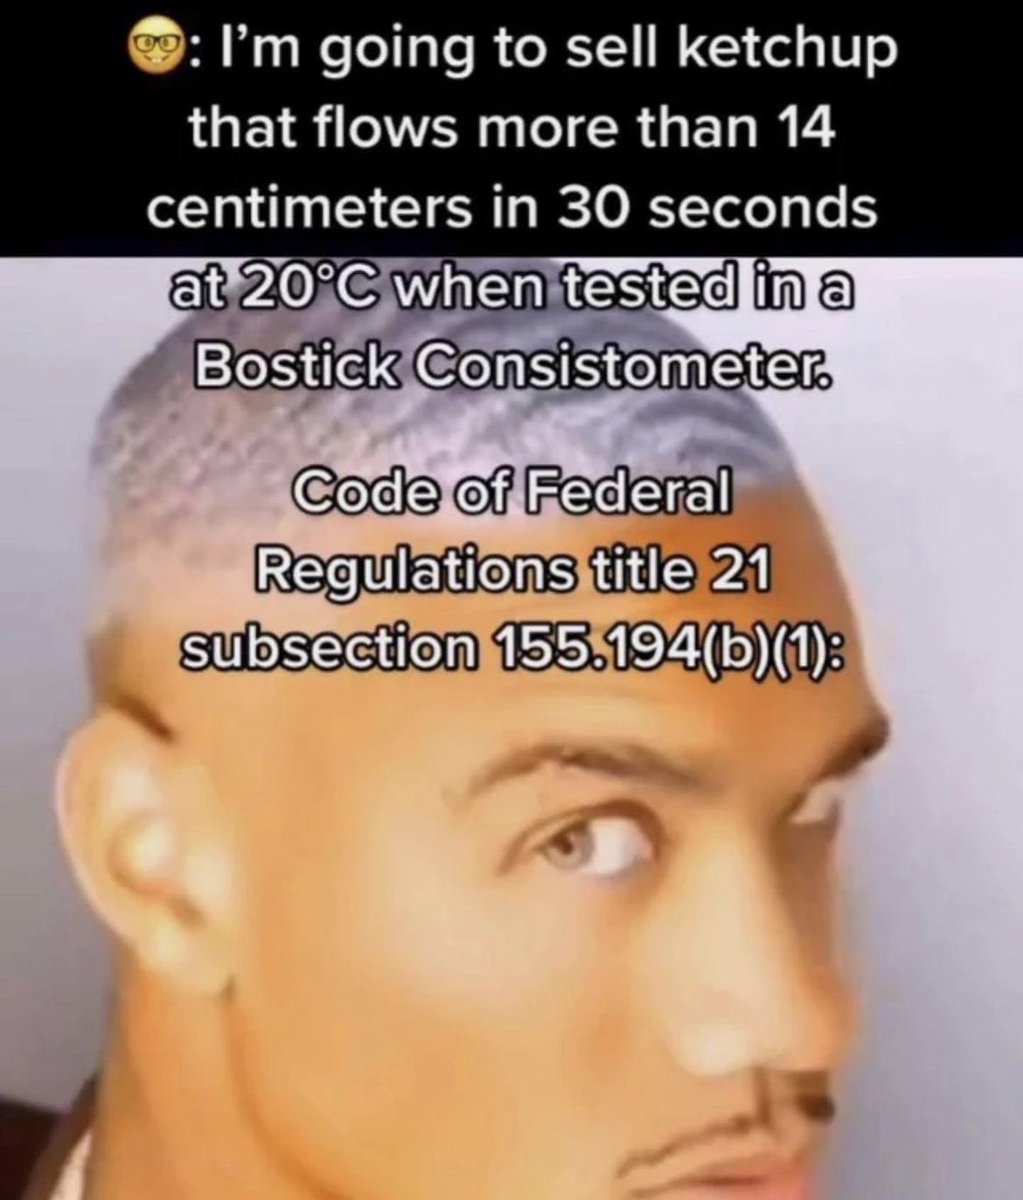 Unhinged TikTok Screenshots - ketchup code of federal regulations meme - I'm going to sell ketchup that flows more than 14 centimeters in 30 seconds at 20C when tested in a